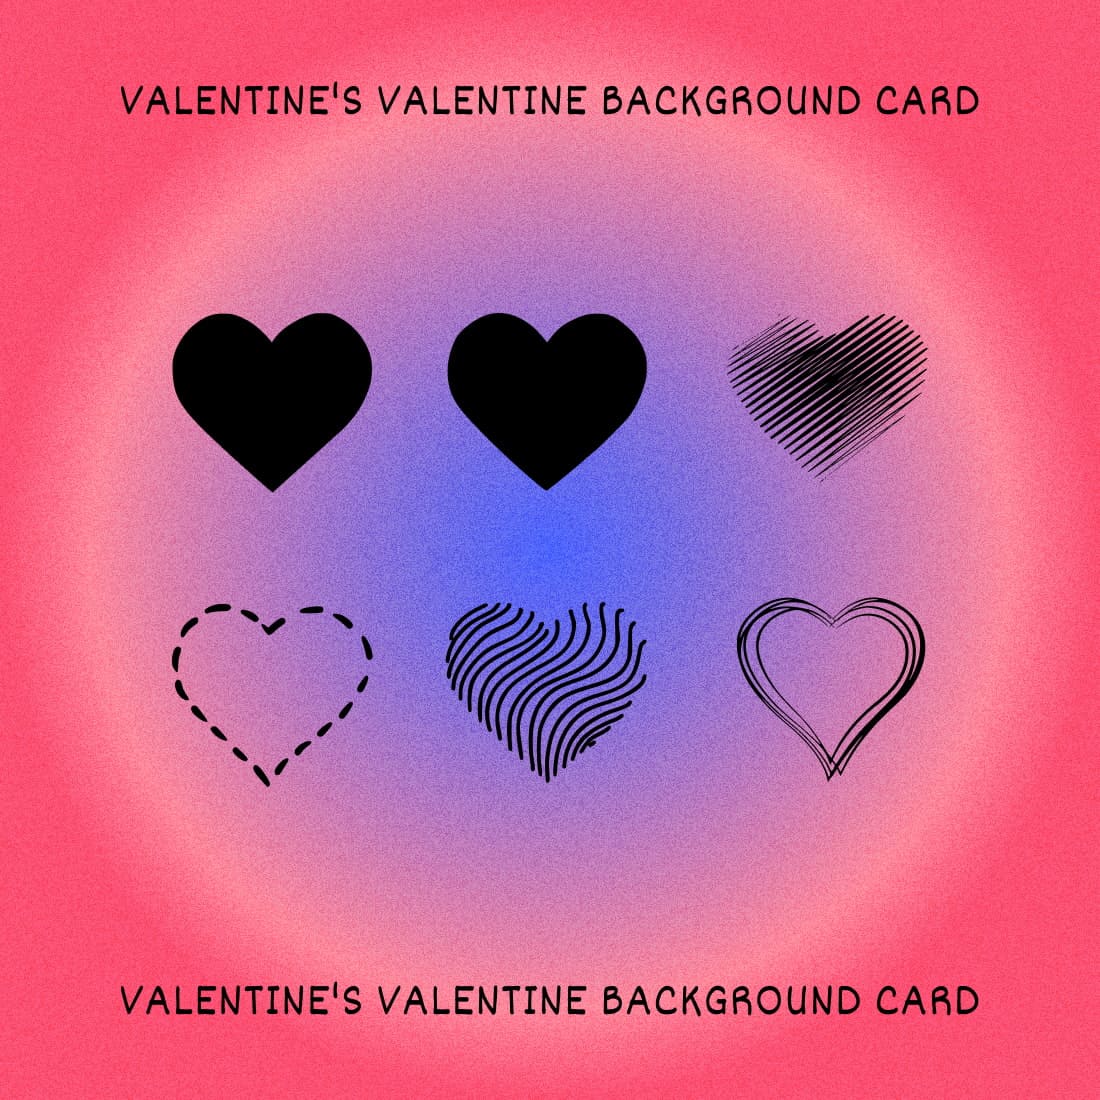 Valentines Valentine Background Card - Colorful Example.